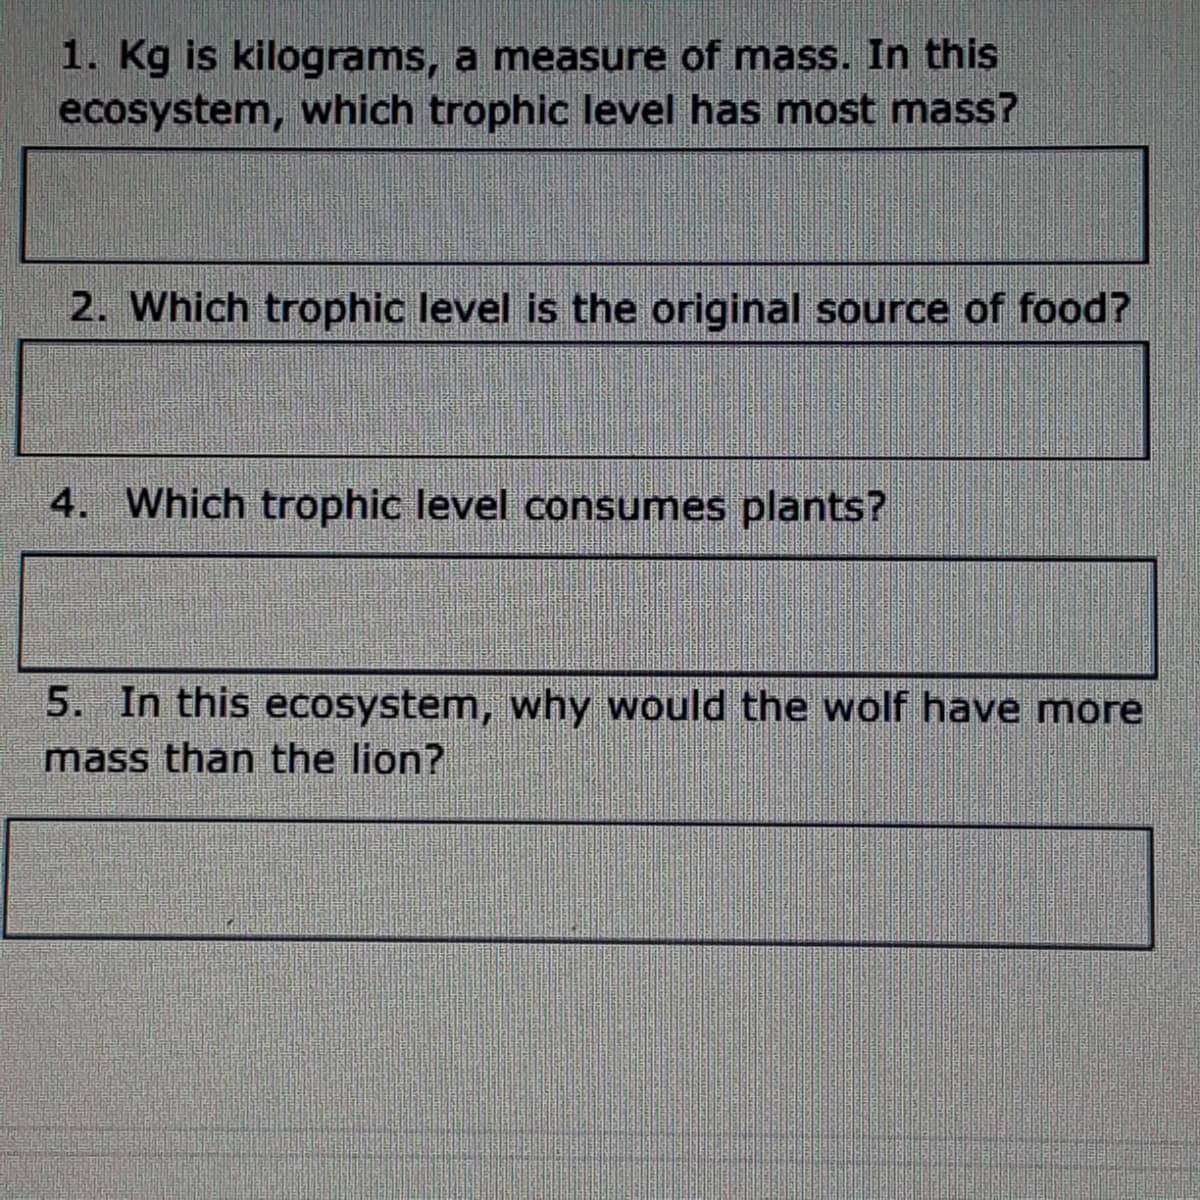 1. Kg is kilograms, a measure of mass. In this
ecosystem, which trophic level has most mass?
2. Which trophic level is the original source of food?
4. Which trophic level consumes plants?
5. In this ecosystem, why would the wolf have more
mass than the lion?
